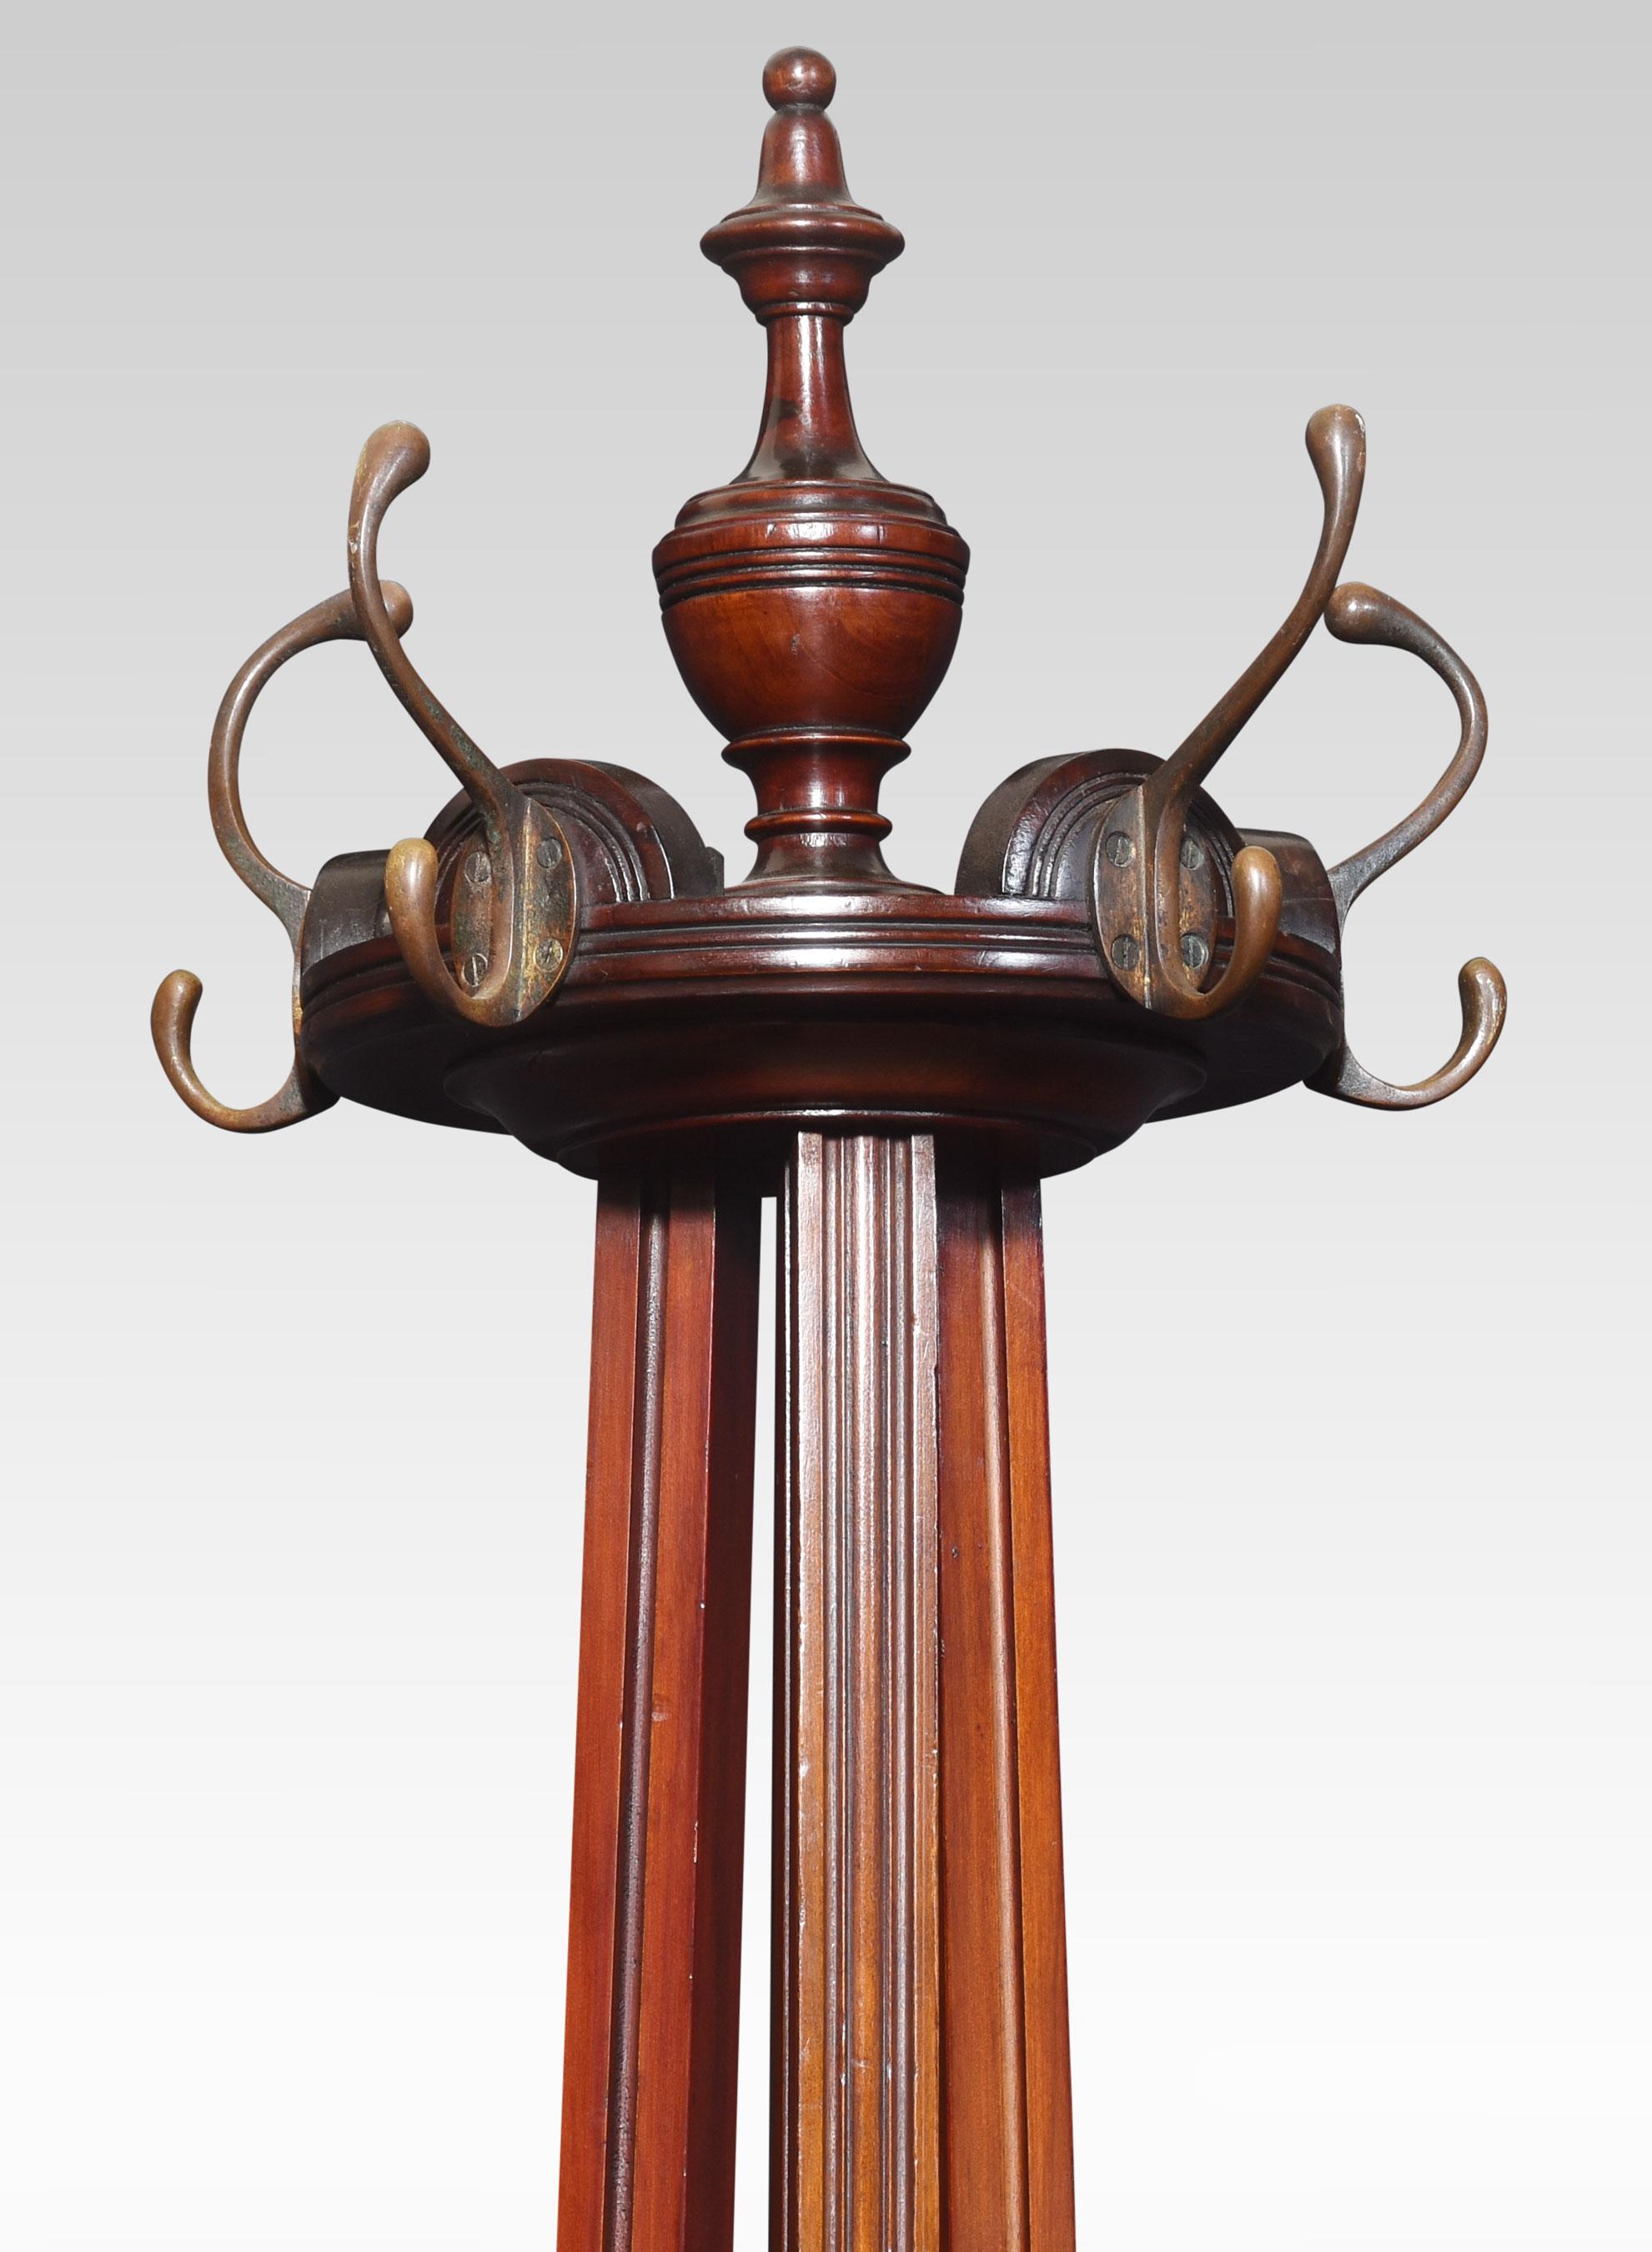 Aesthetic walnut hat and coat stand, the turned finial with four revolving hooks on three reeded stems. The base fitted with three splayed legs united by circular under tier.
Dimensions
Height 81.5 Inches
Width 25.5 Inches
Depth 25.5 Inches